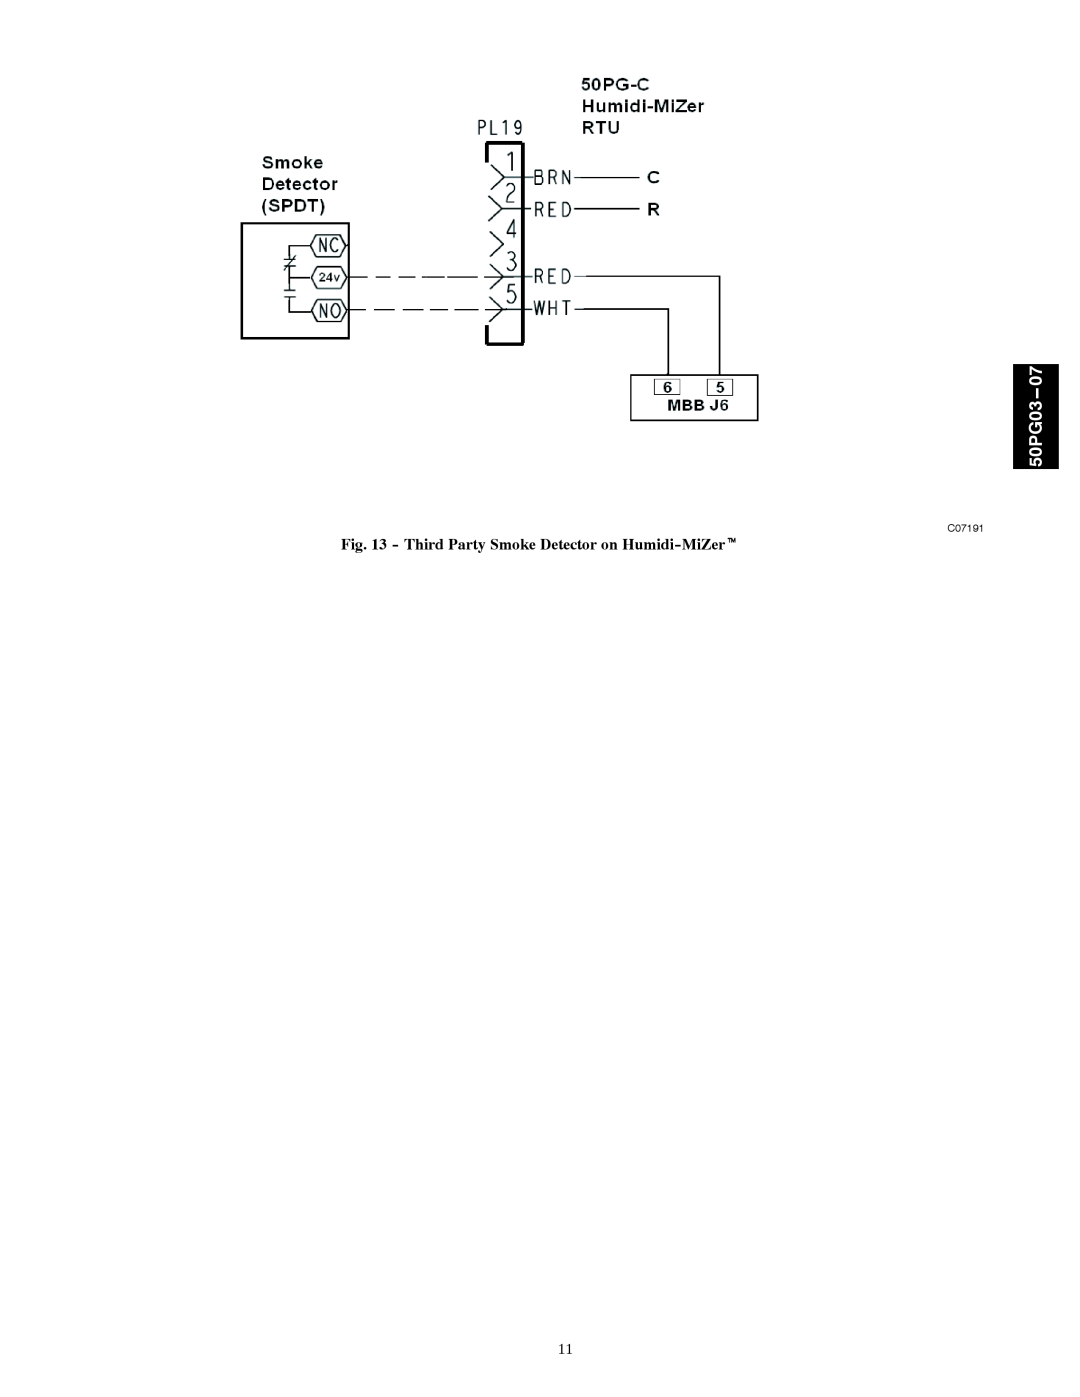 Carrier 50PG03-07 installation instructions 50PG03--07, C07191 